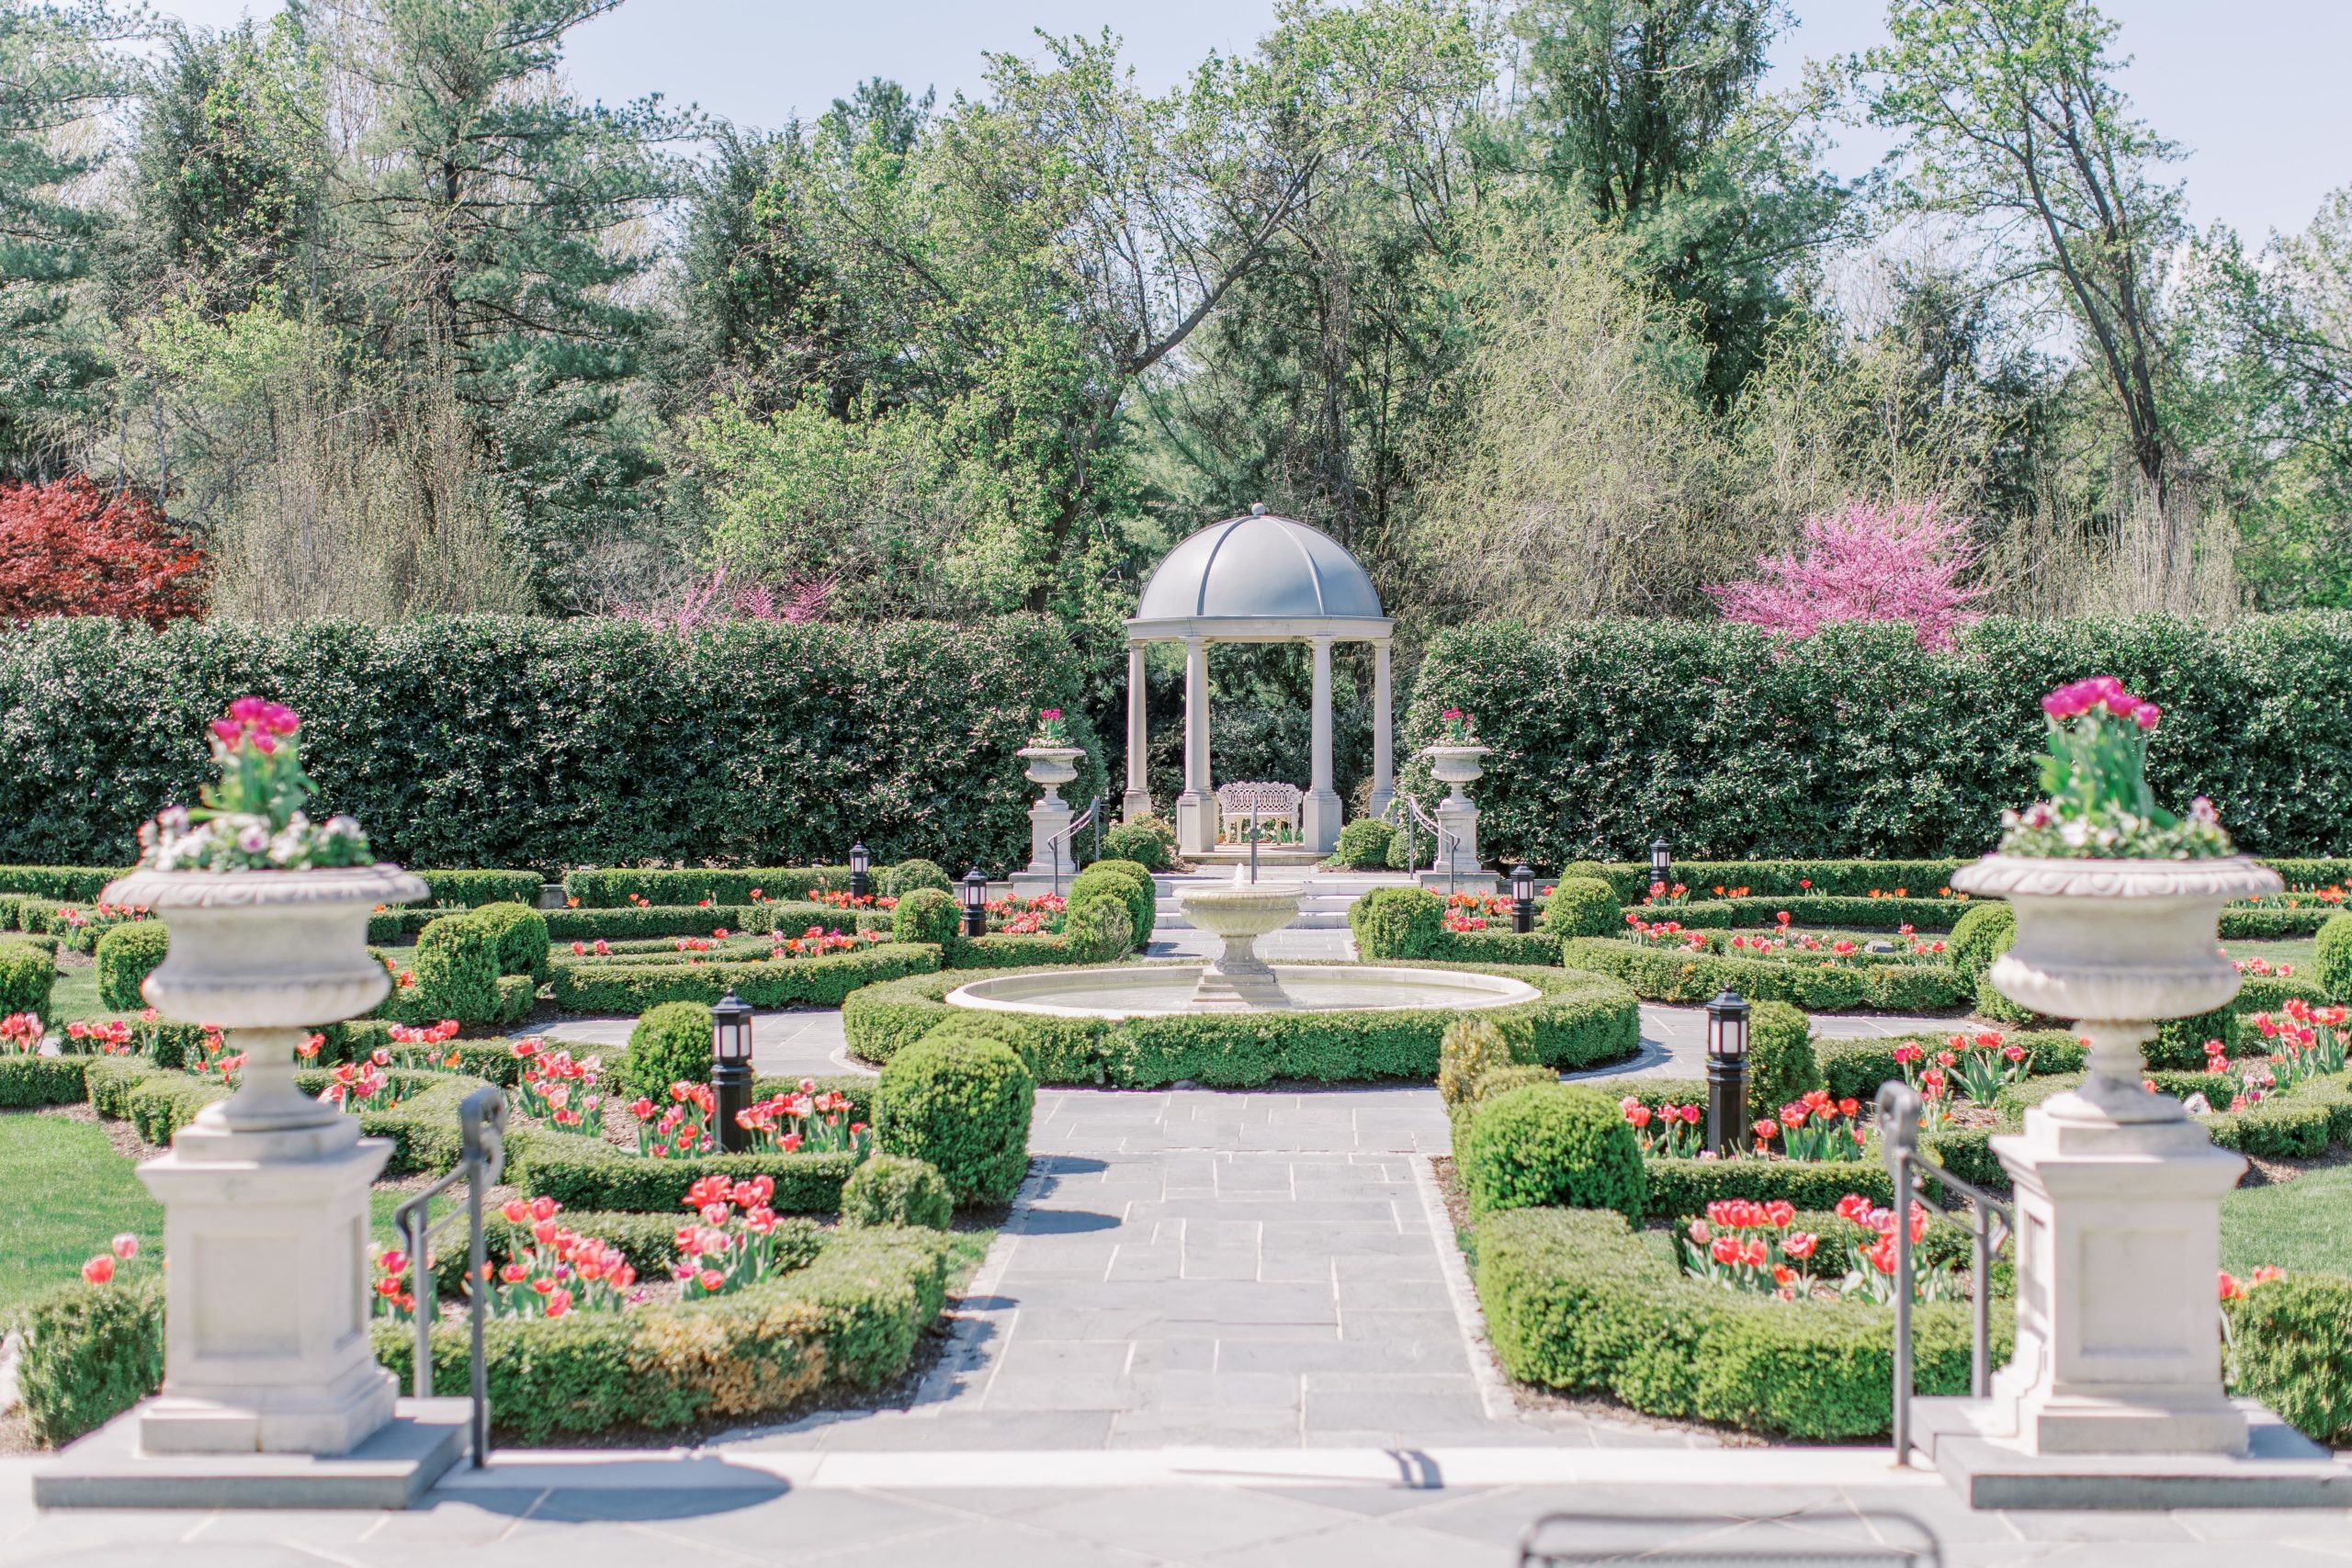 Chateau garden with pink and purple flowers at for a Romantic Park Chateau Wedding Photography